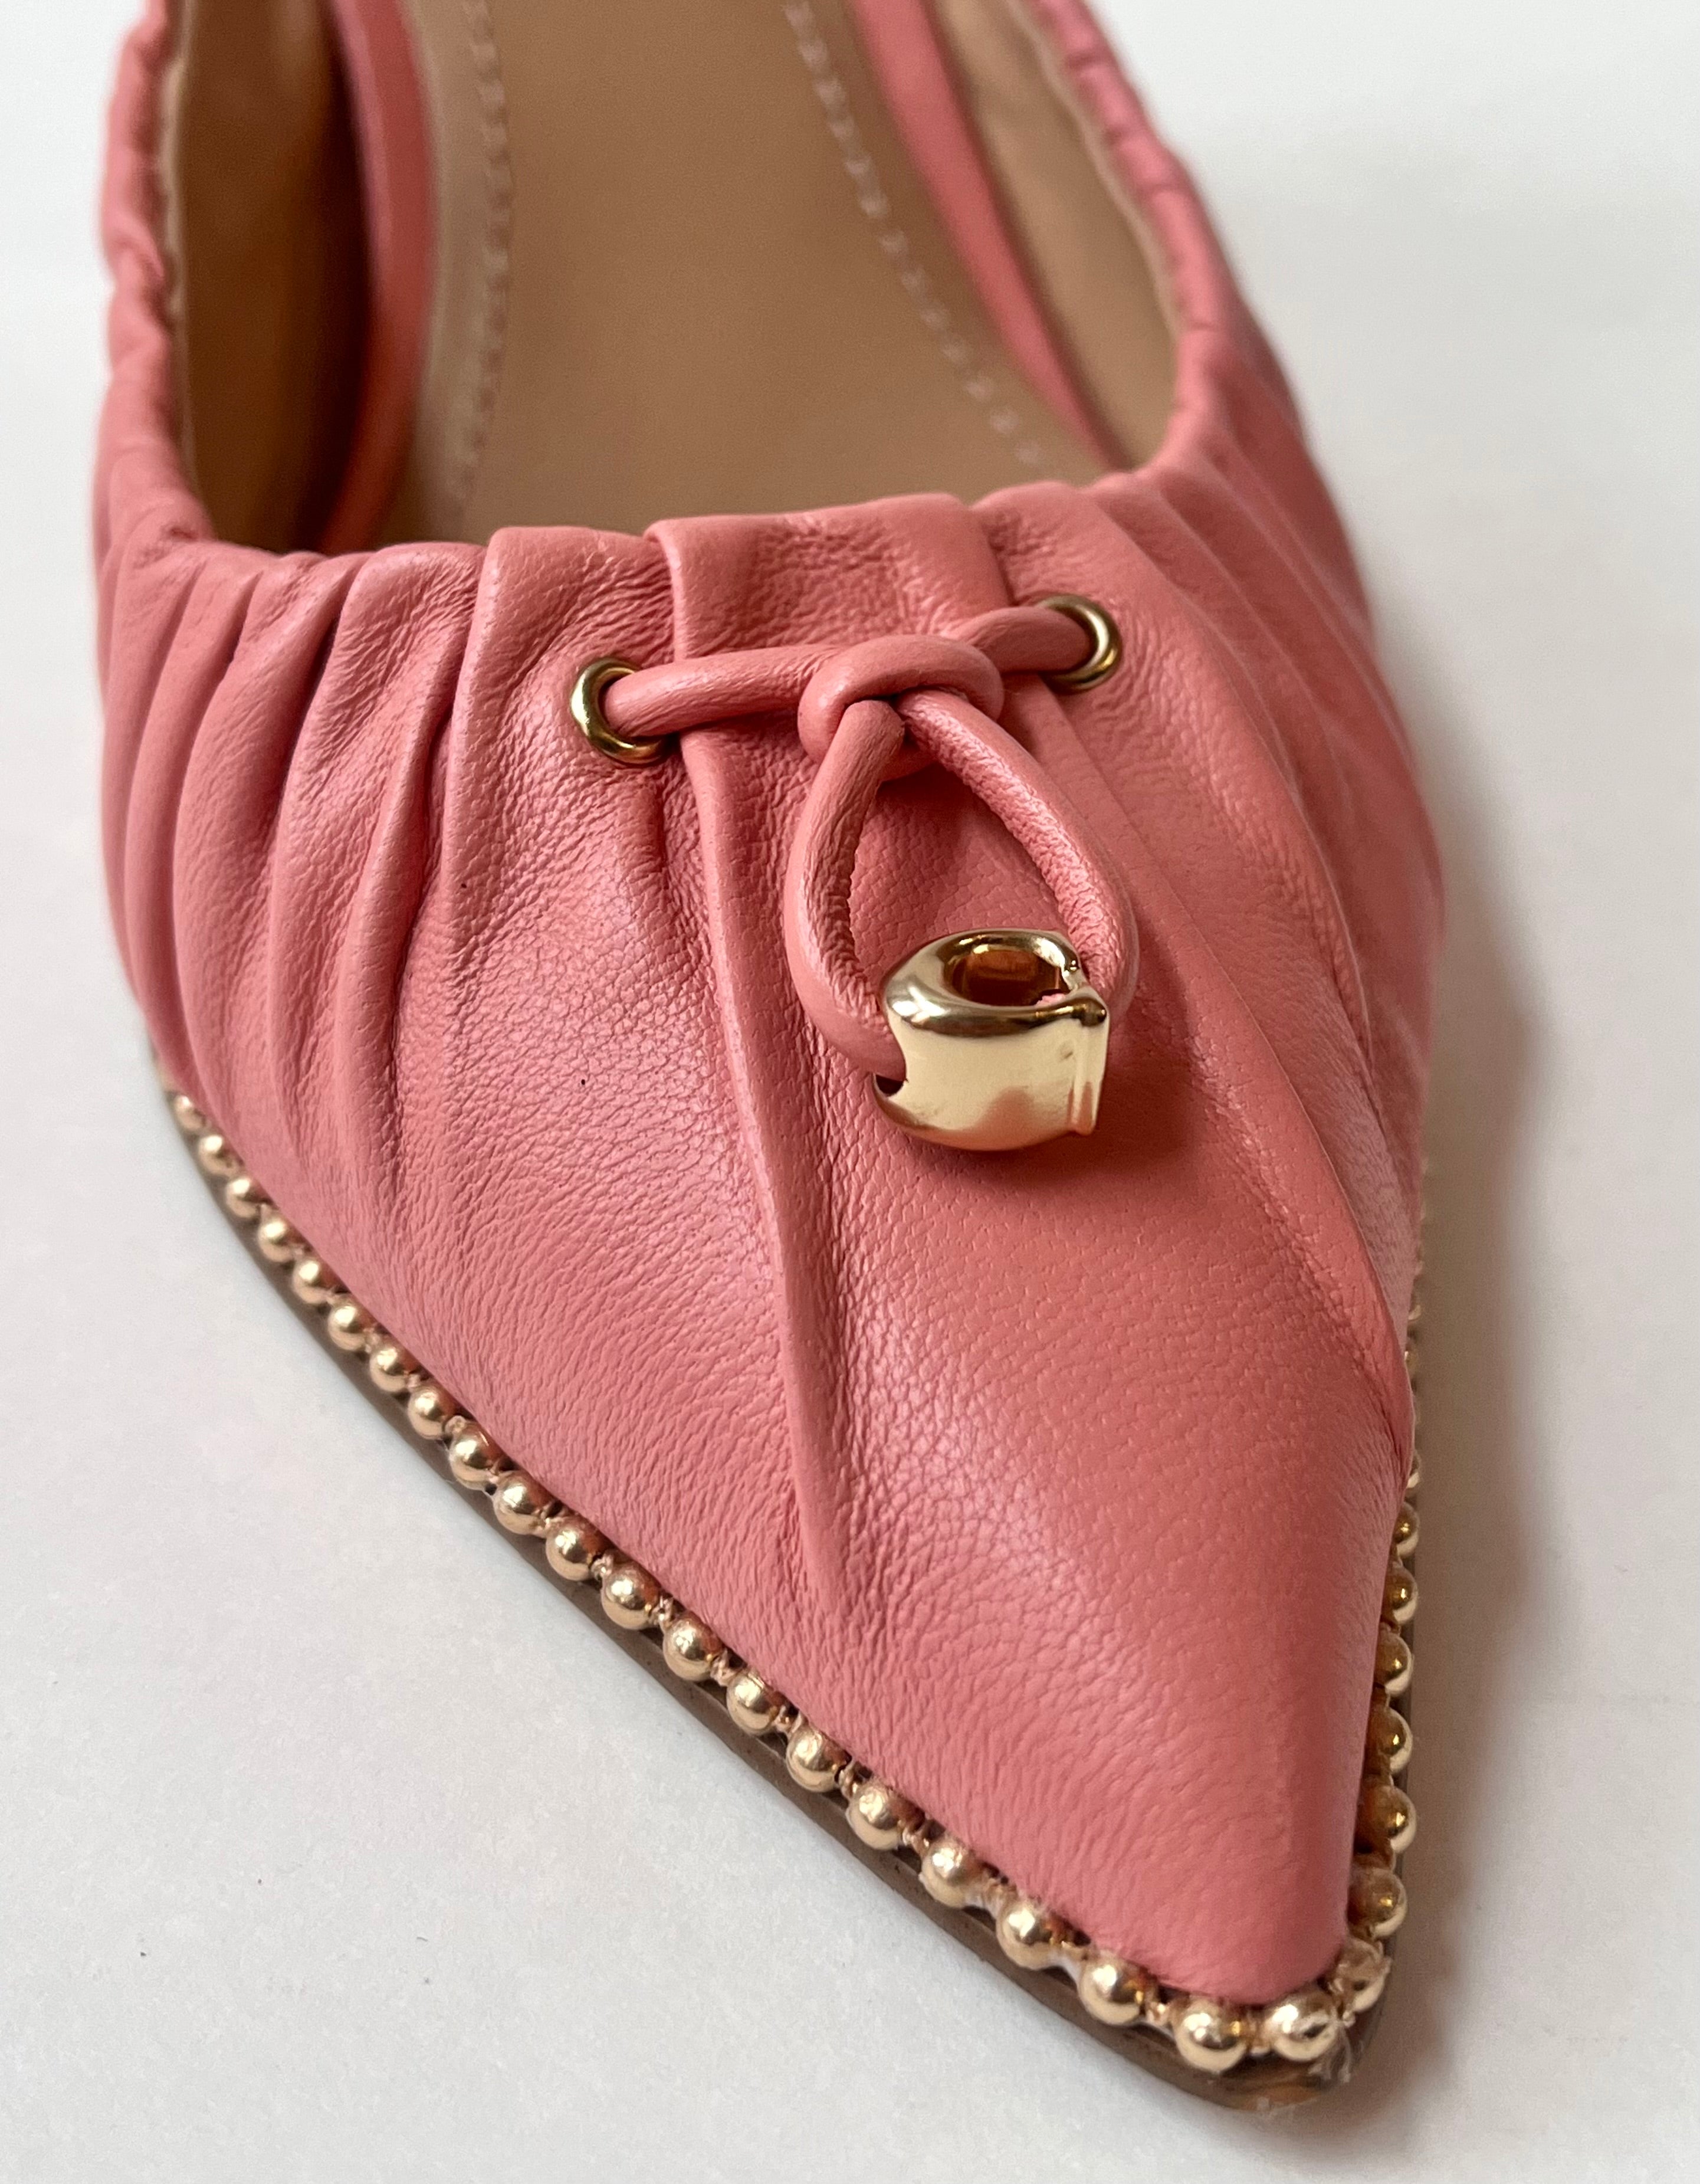 Pre-Owned Coach Candy Pink Wionna Sling Back Pump, Size: 8